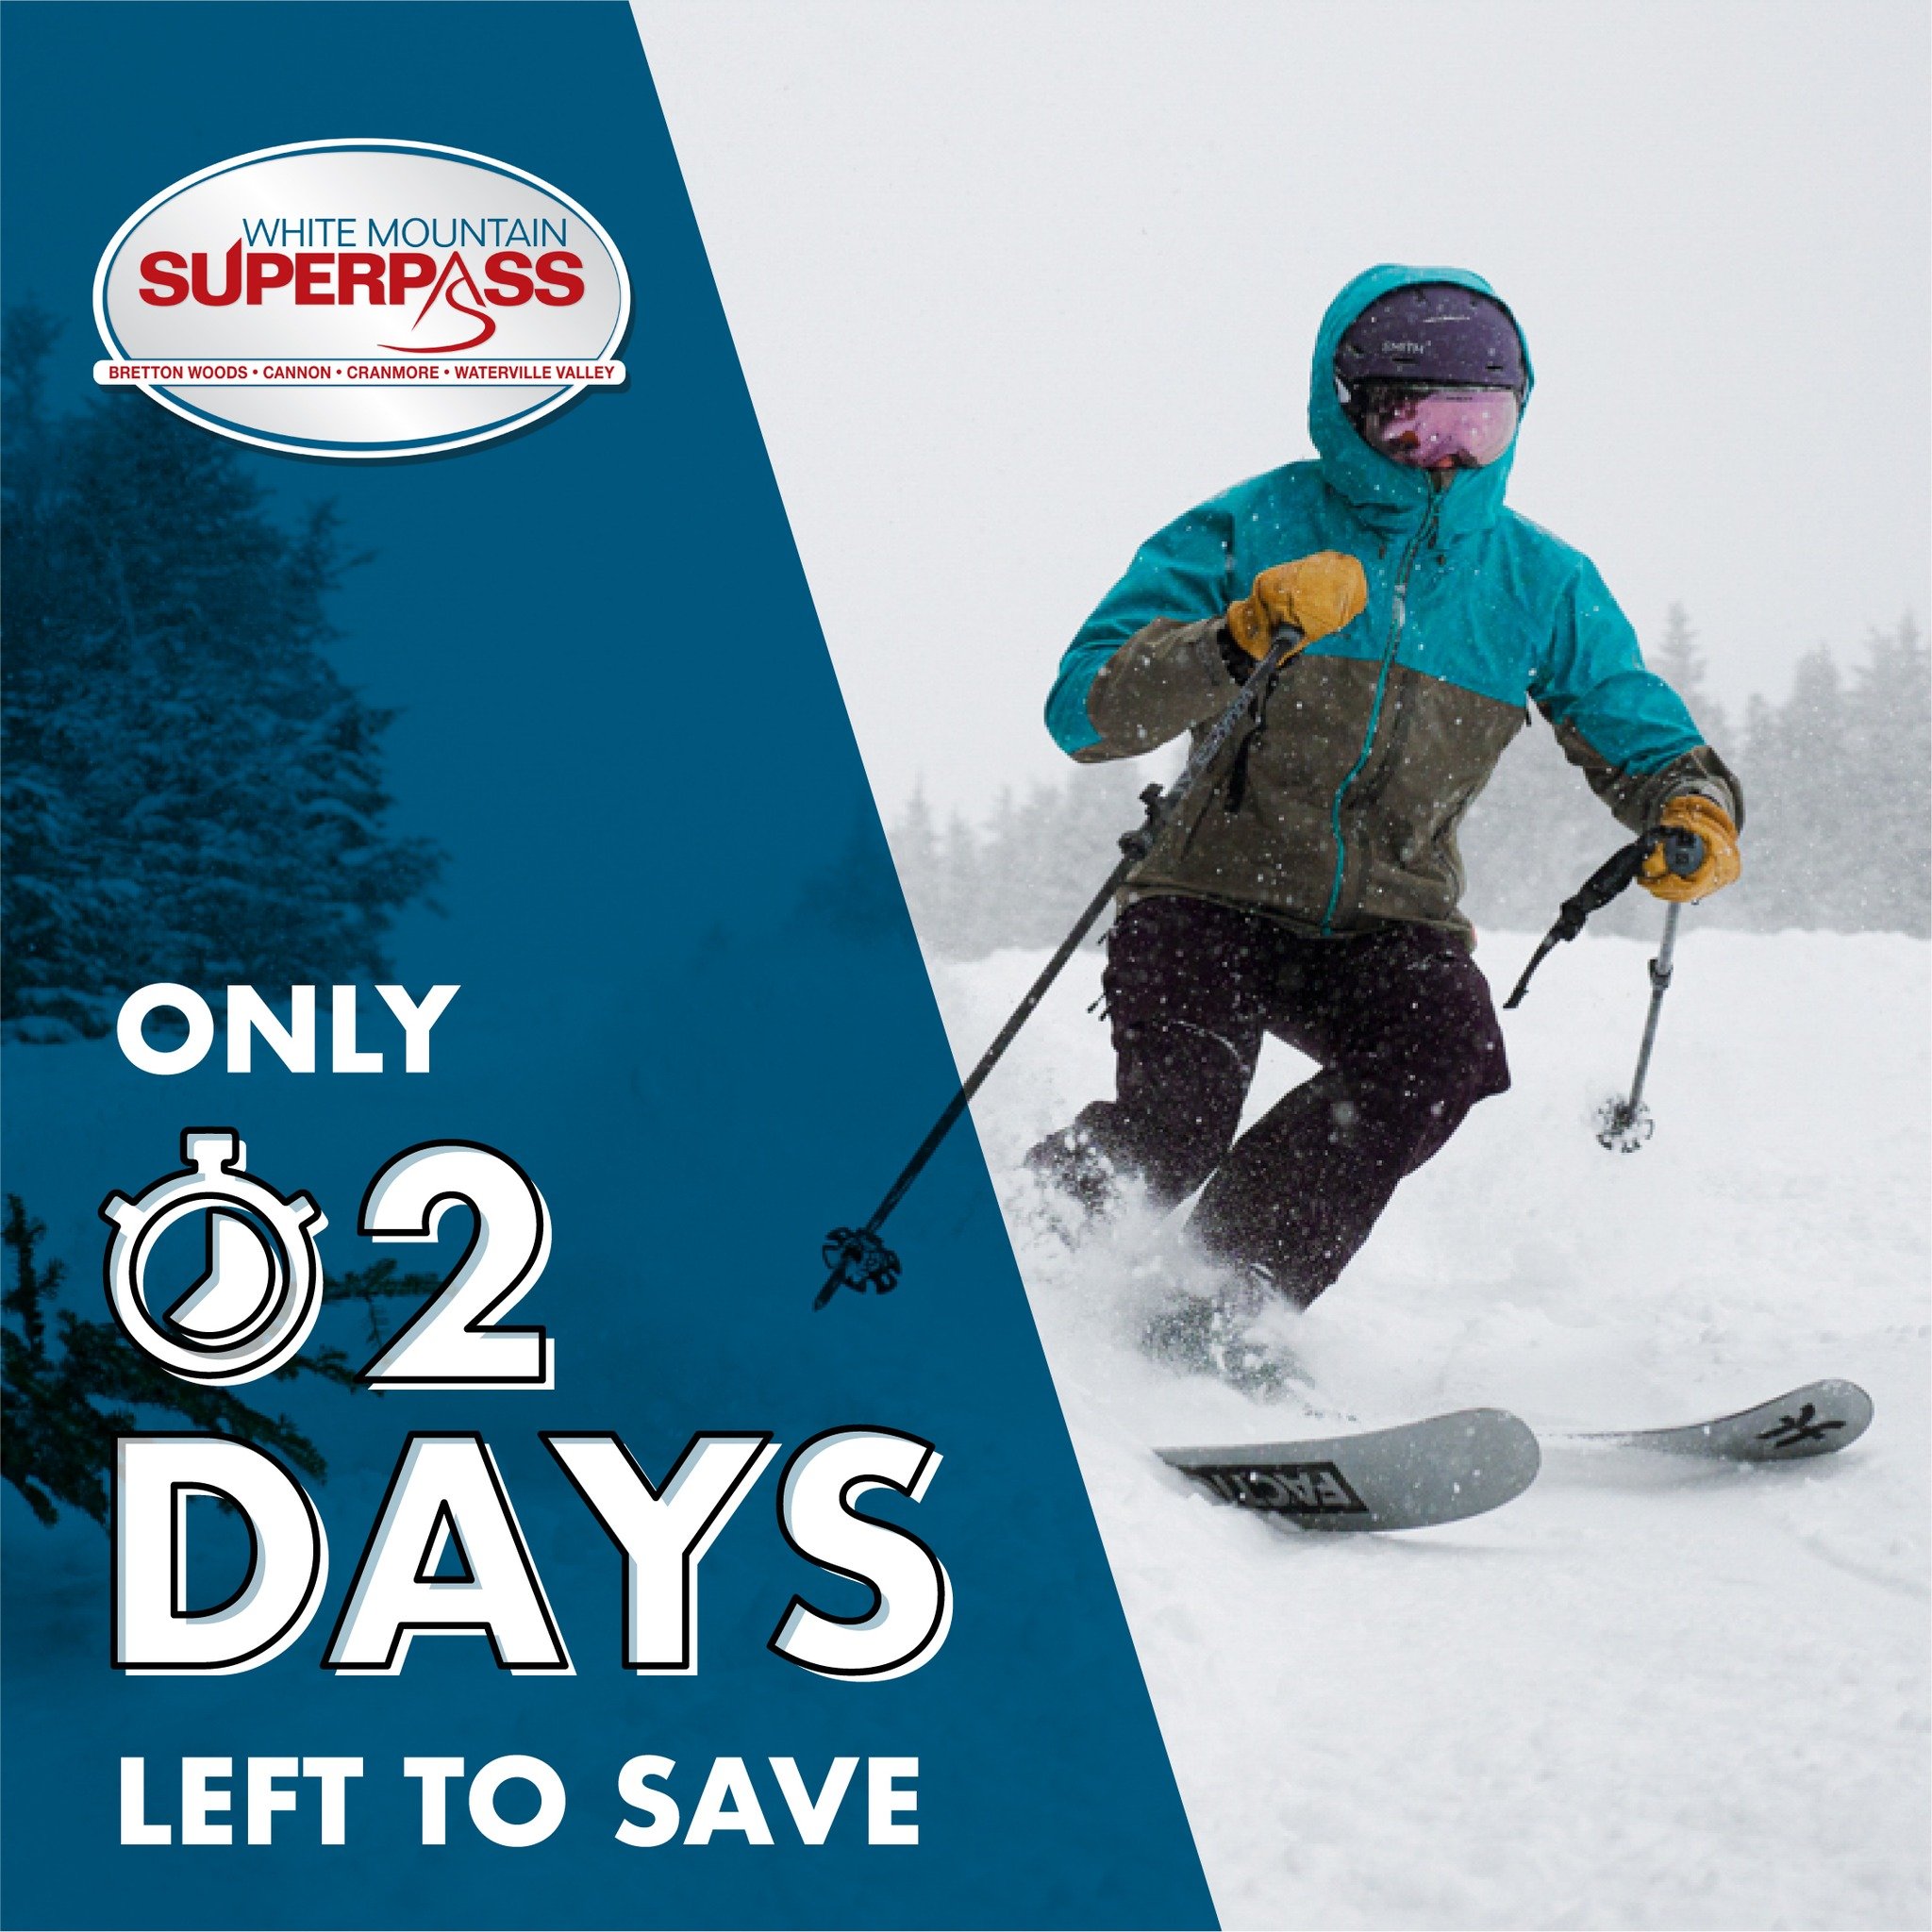 2 days until the White Mountain Superpass sale ends - the clock is ticking! ⏰ Ski at Waterville Valley, Cannon, Cranmore, and Bretton Woods all under 1 pass!

Secure your pass now at its lowest rate, 🔗 in bio for more info